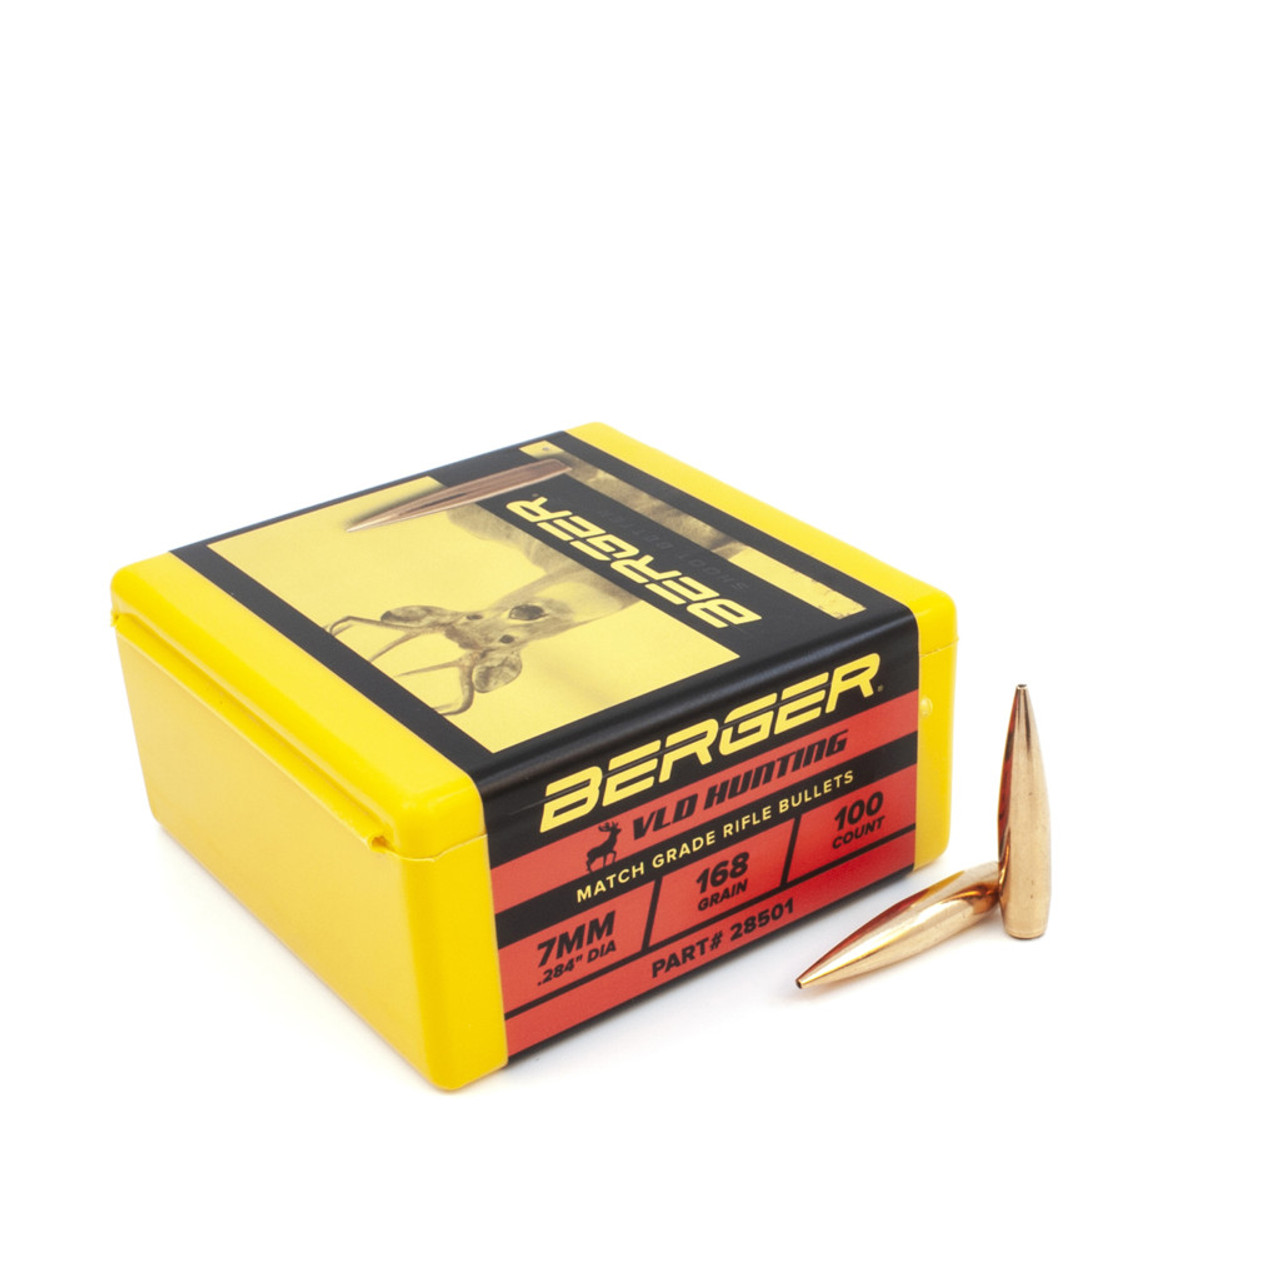 168 Grain VLD 284 Caliber, 7mm (.284 Diameter) Berger Hunting Bullets (Box  of 100) - The Extreme Store